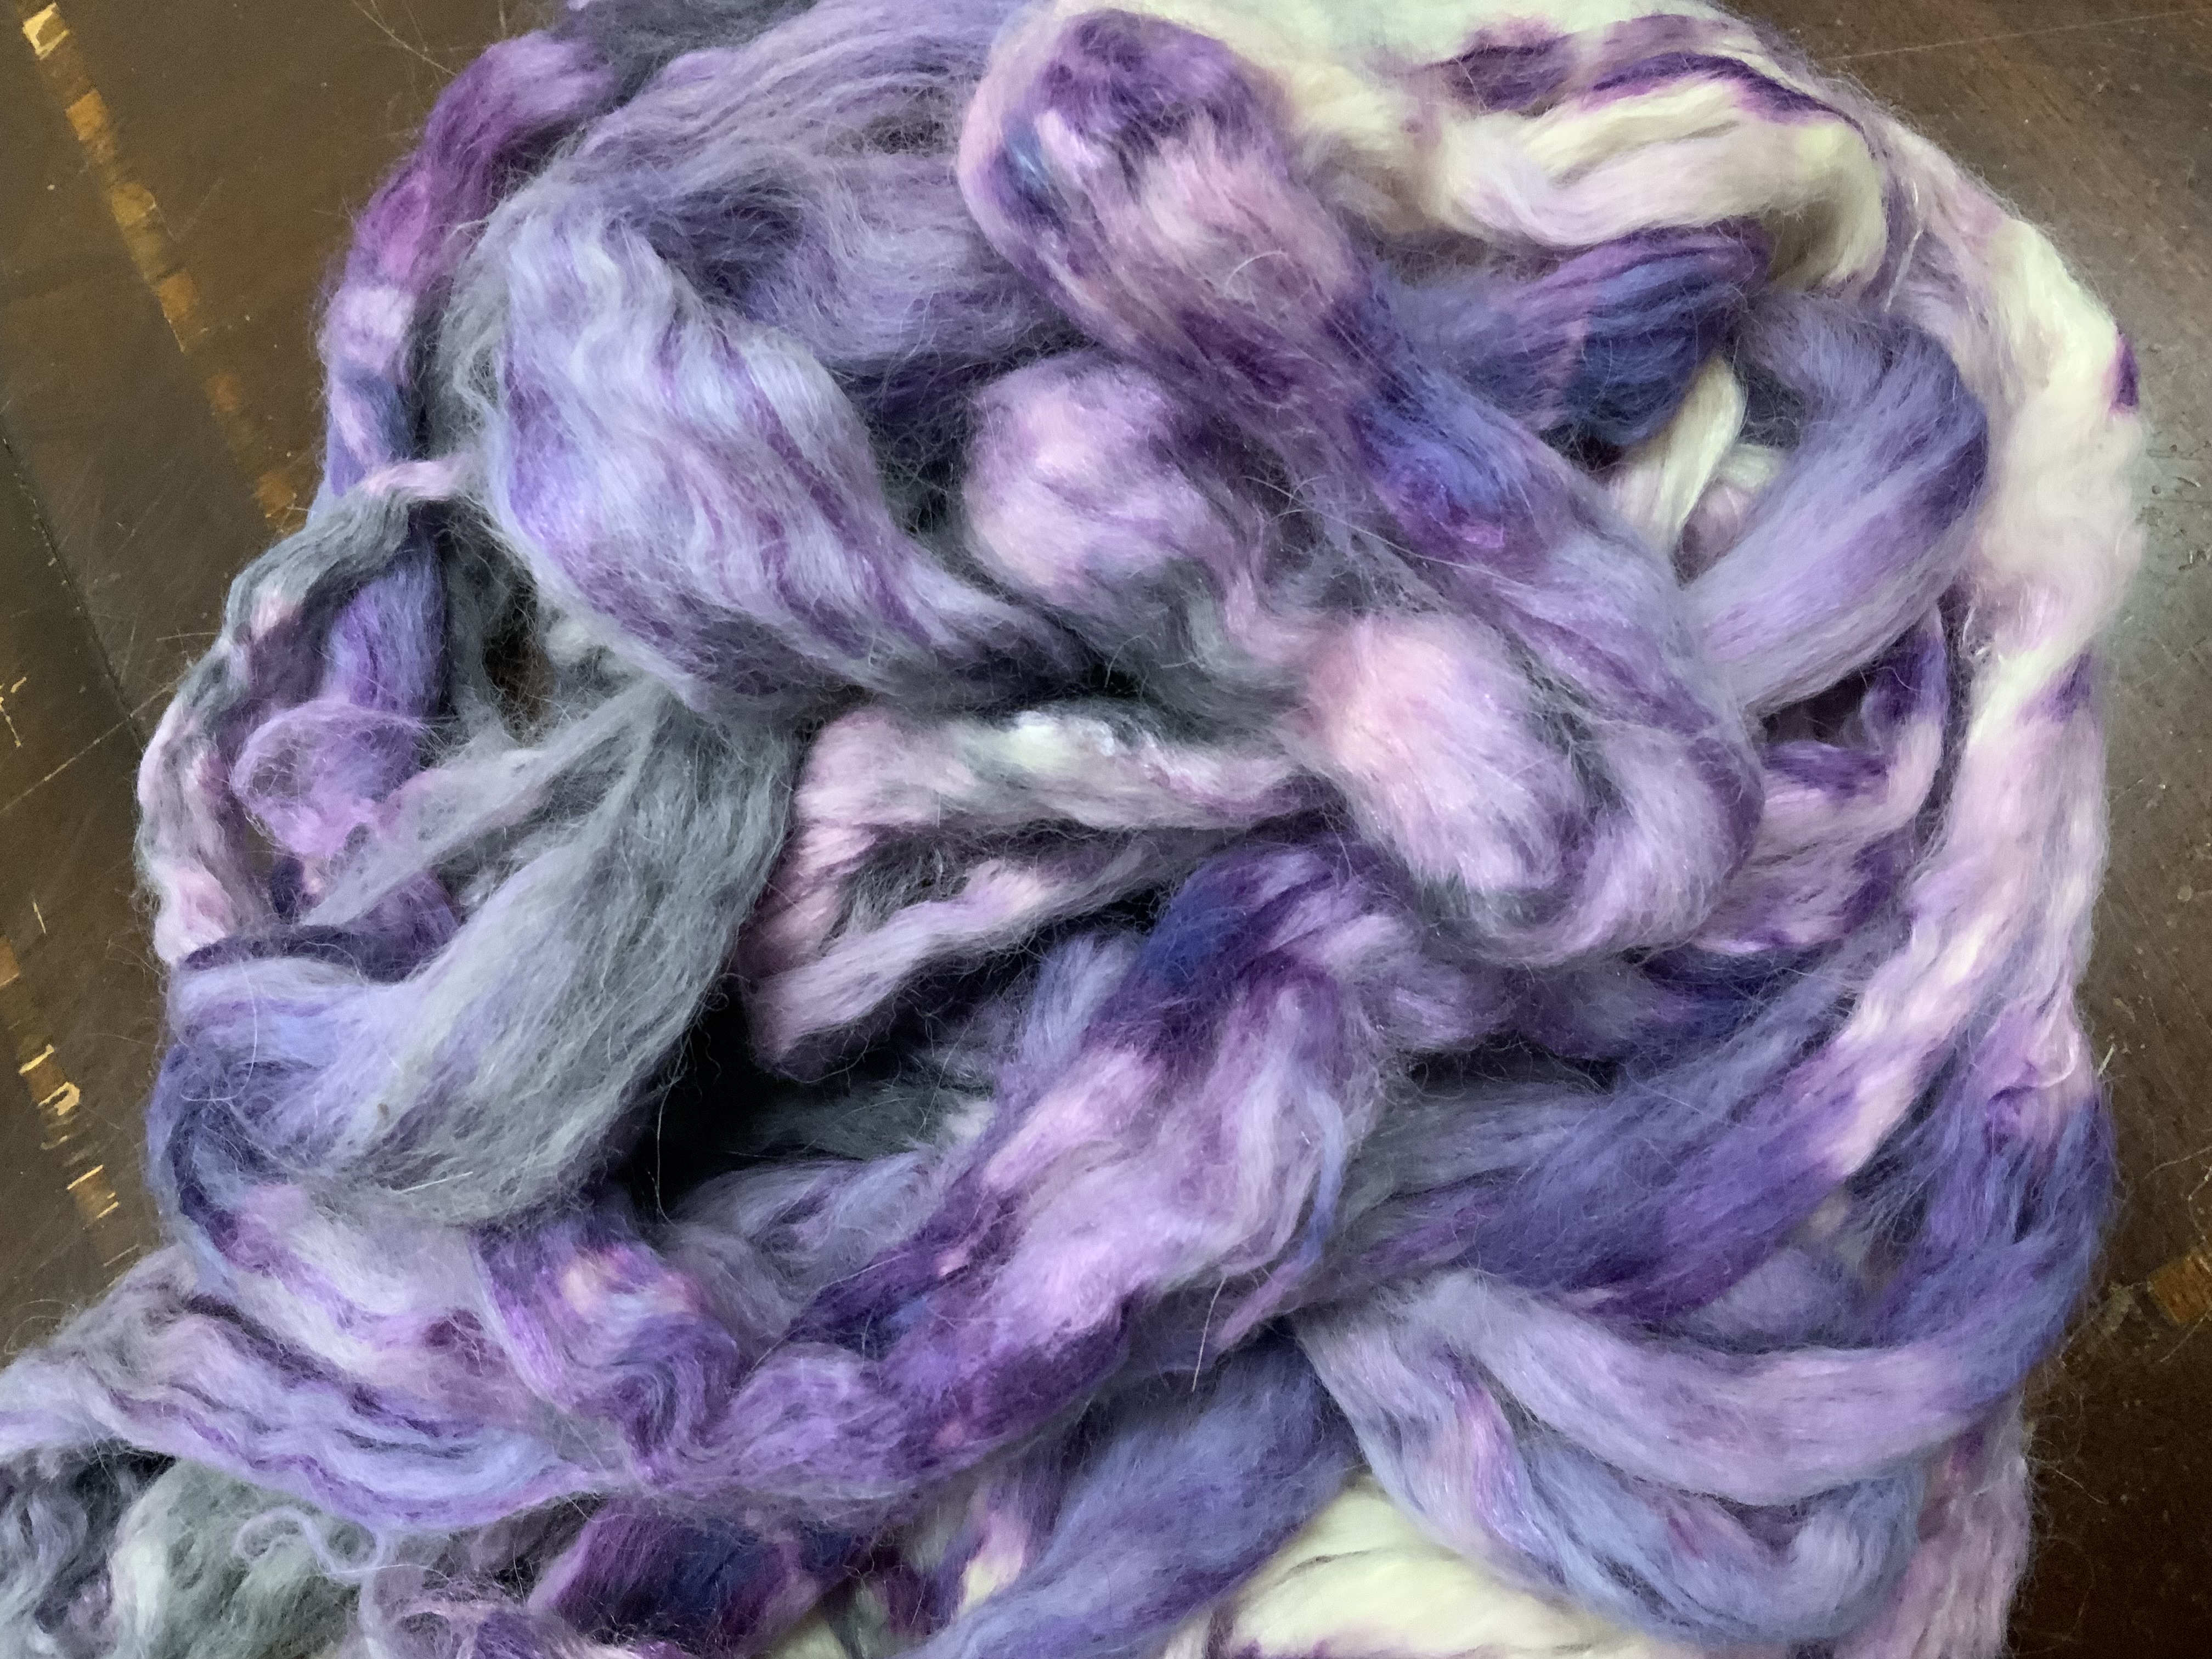 50% Alpaca 50% Tussah Silk Top Dyed by Bewitching Fibers